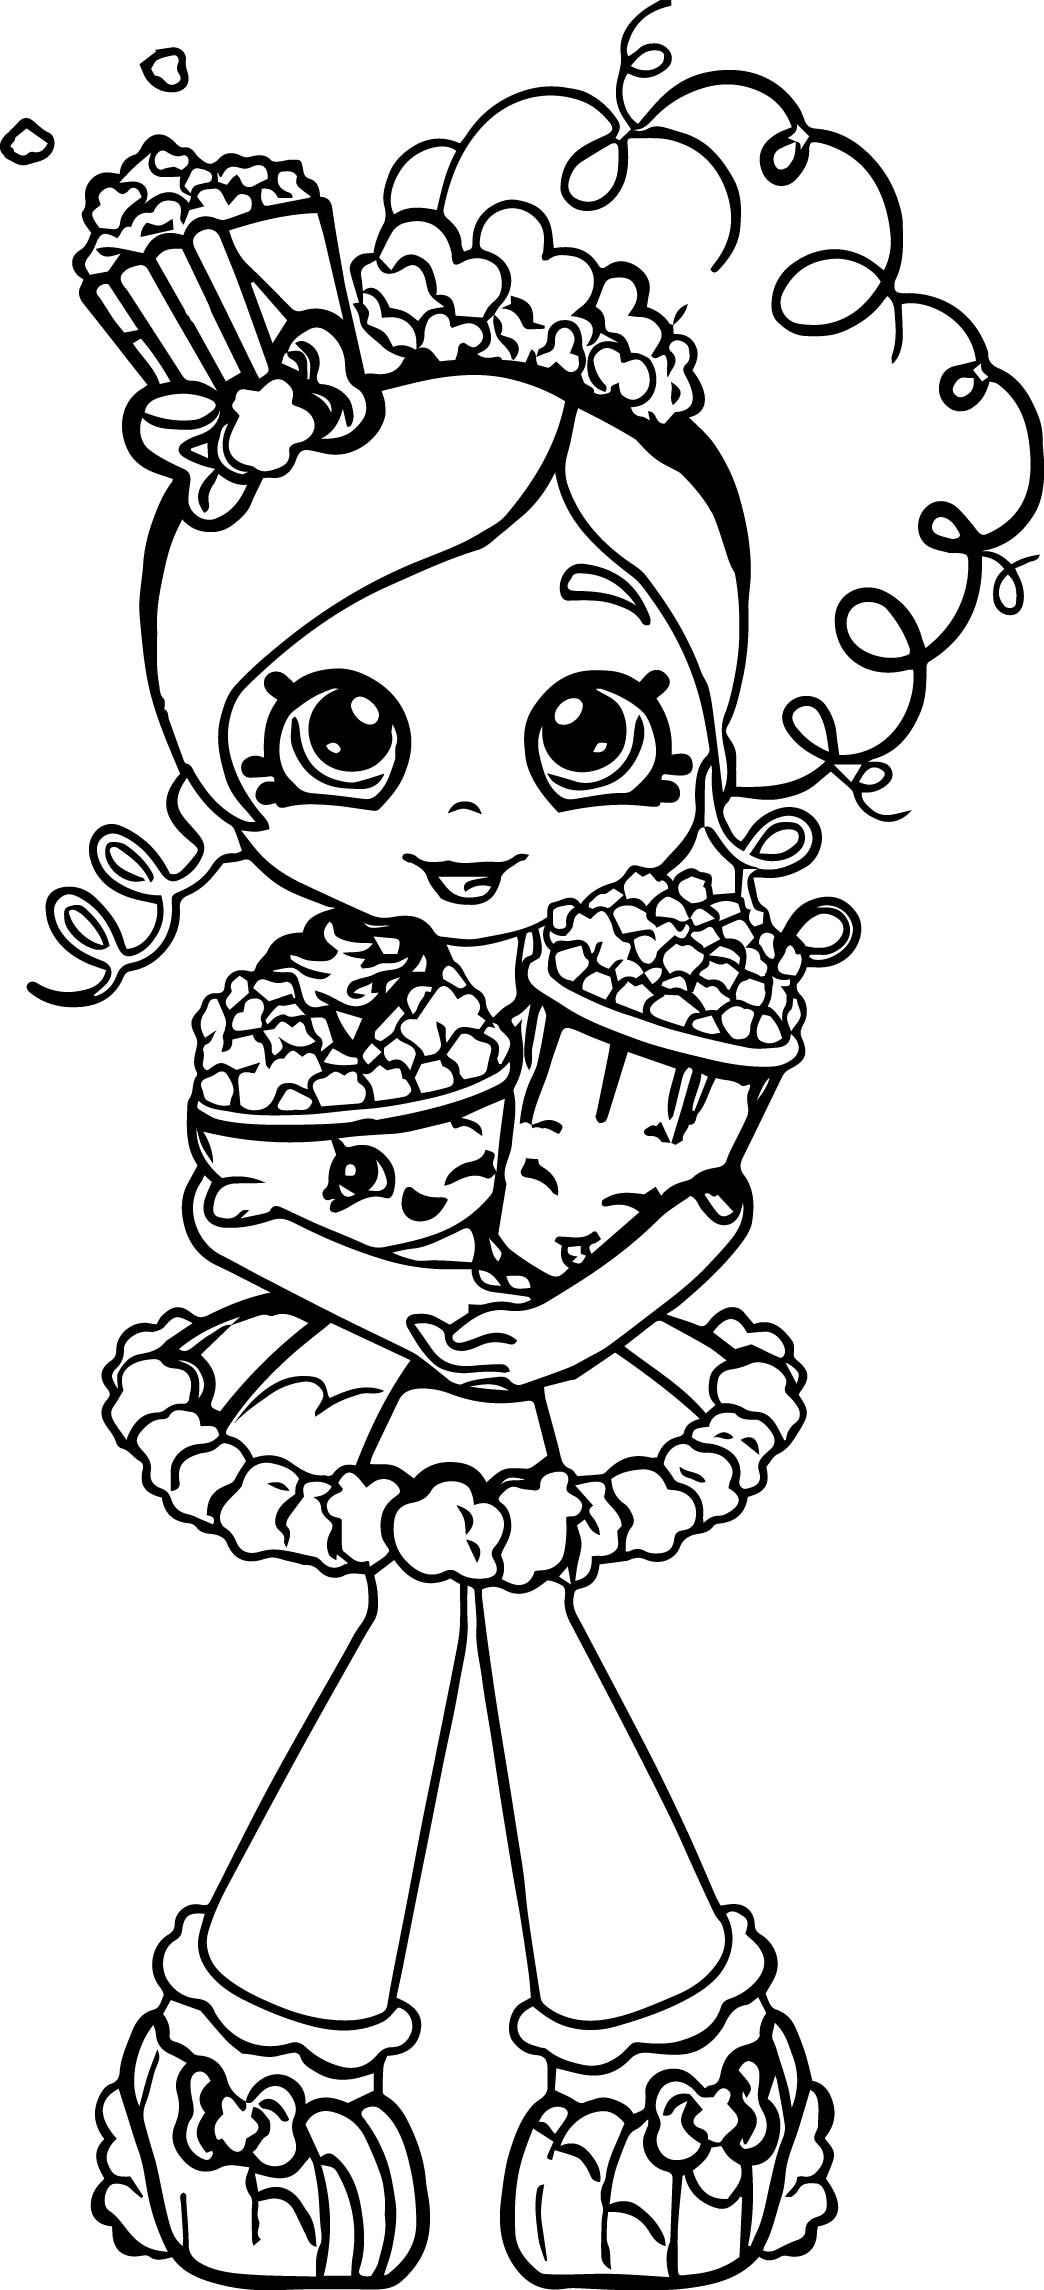 Coloring Pages For Girls Shopkins
 Popcorn Shopkins Girl Coloring Page